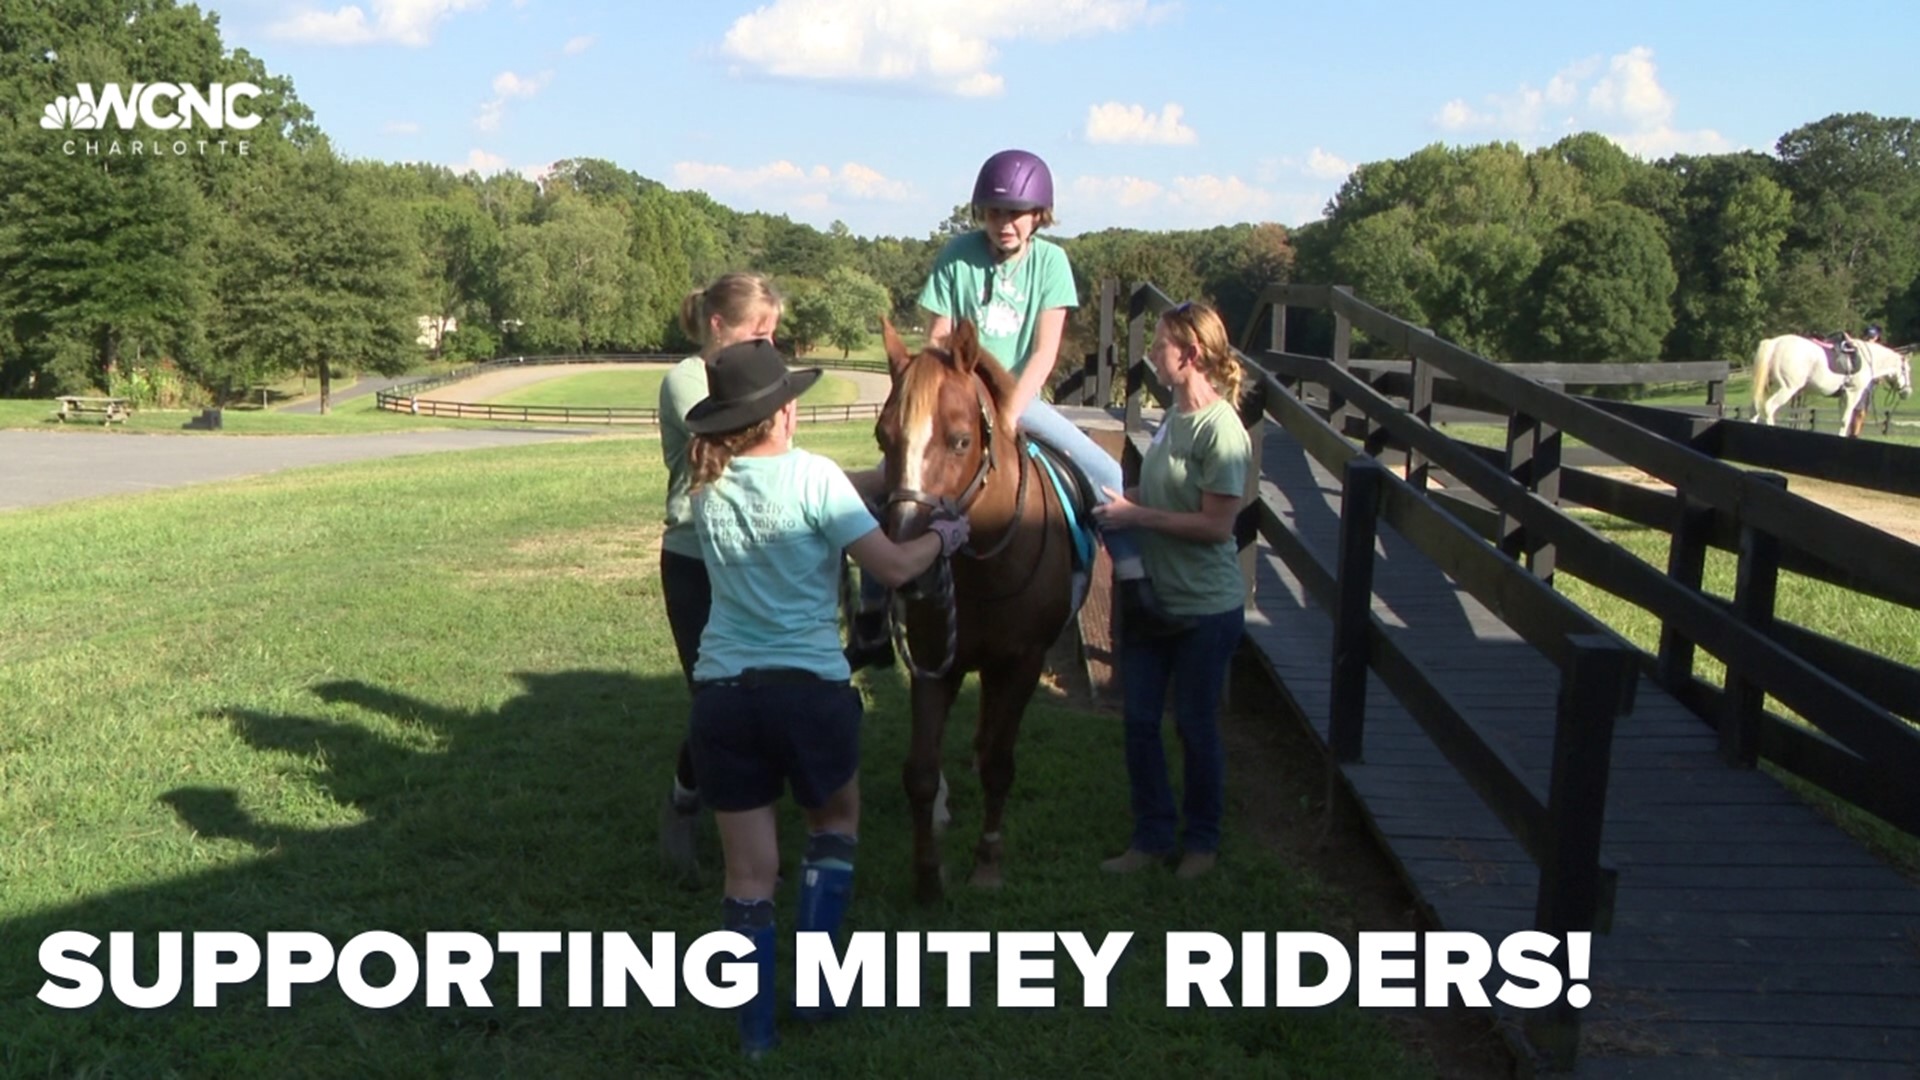 WCNC Charlotte's Carolyn Bruck tells us what the Mitey Riders is all about.